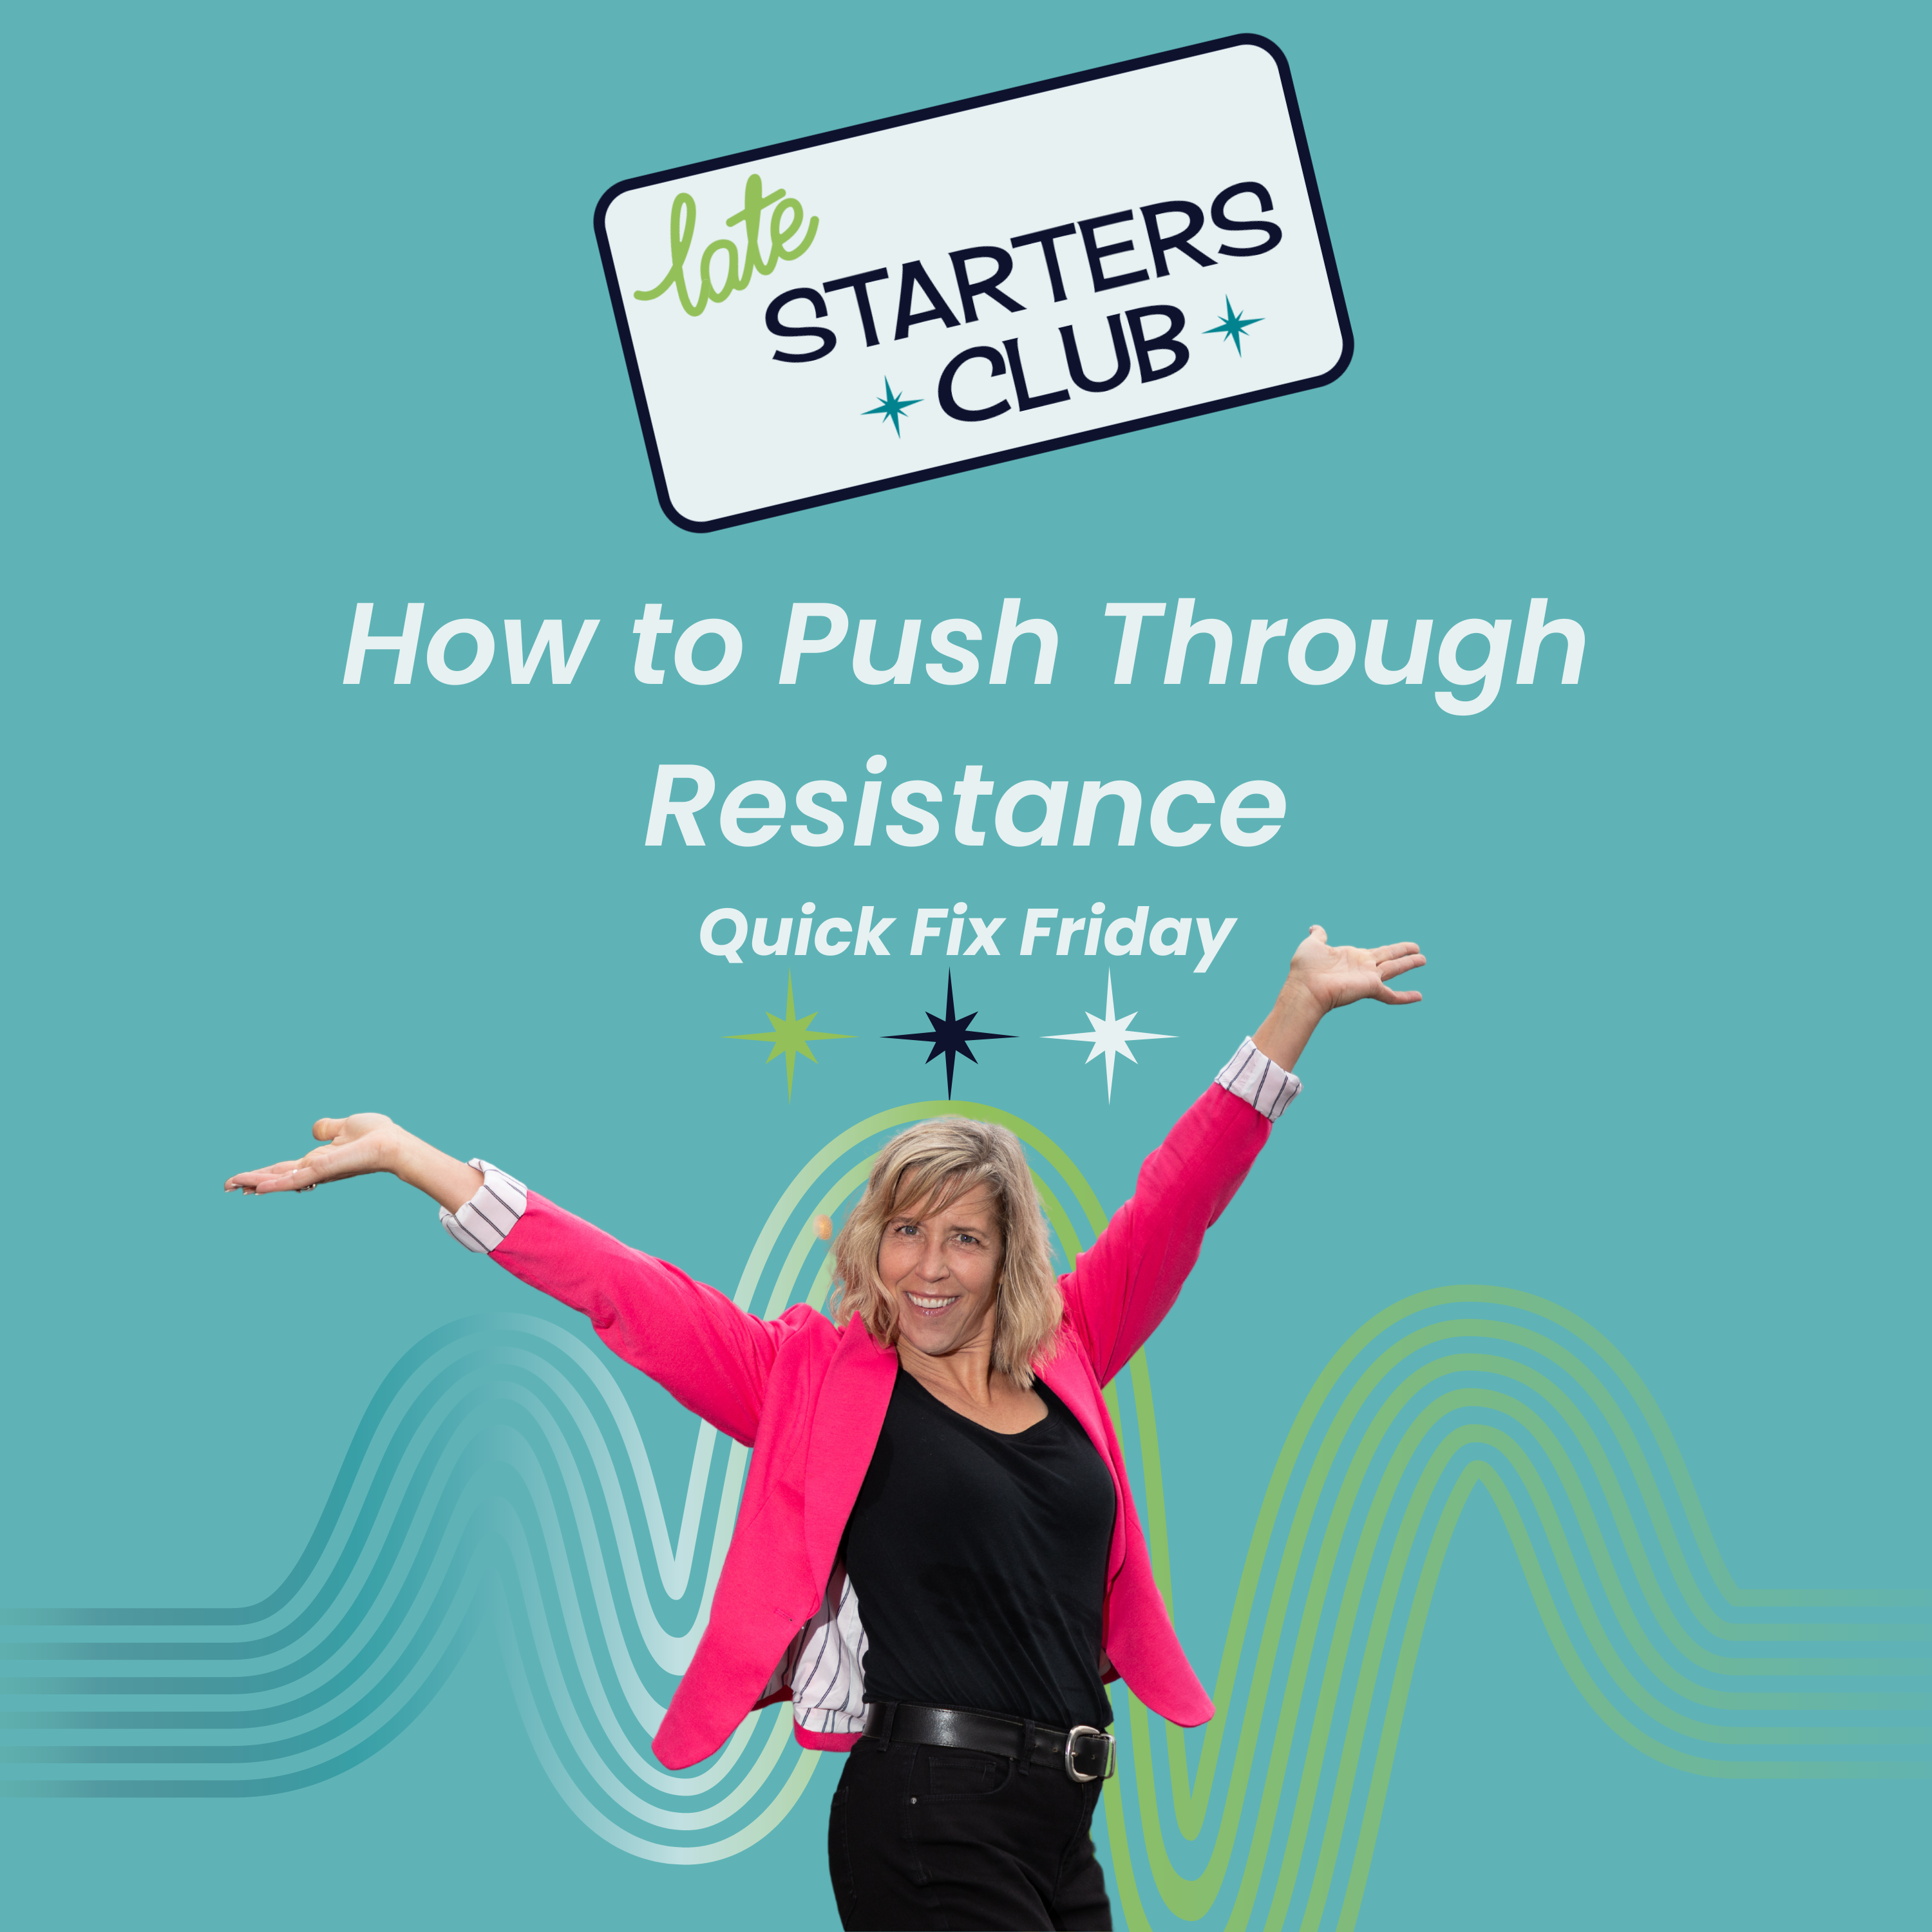 88: How to Push Through Resistance – Quick Fix Friday